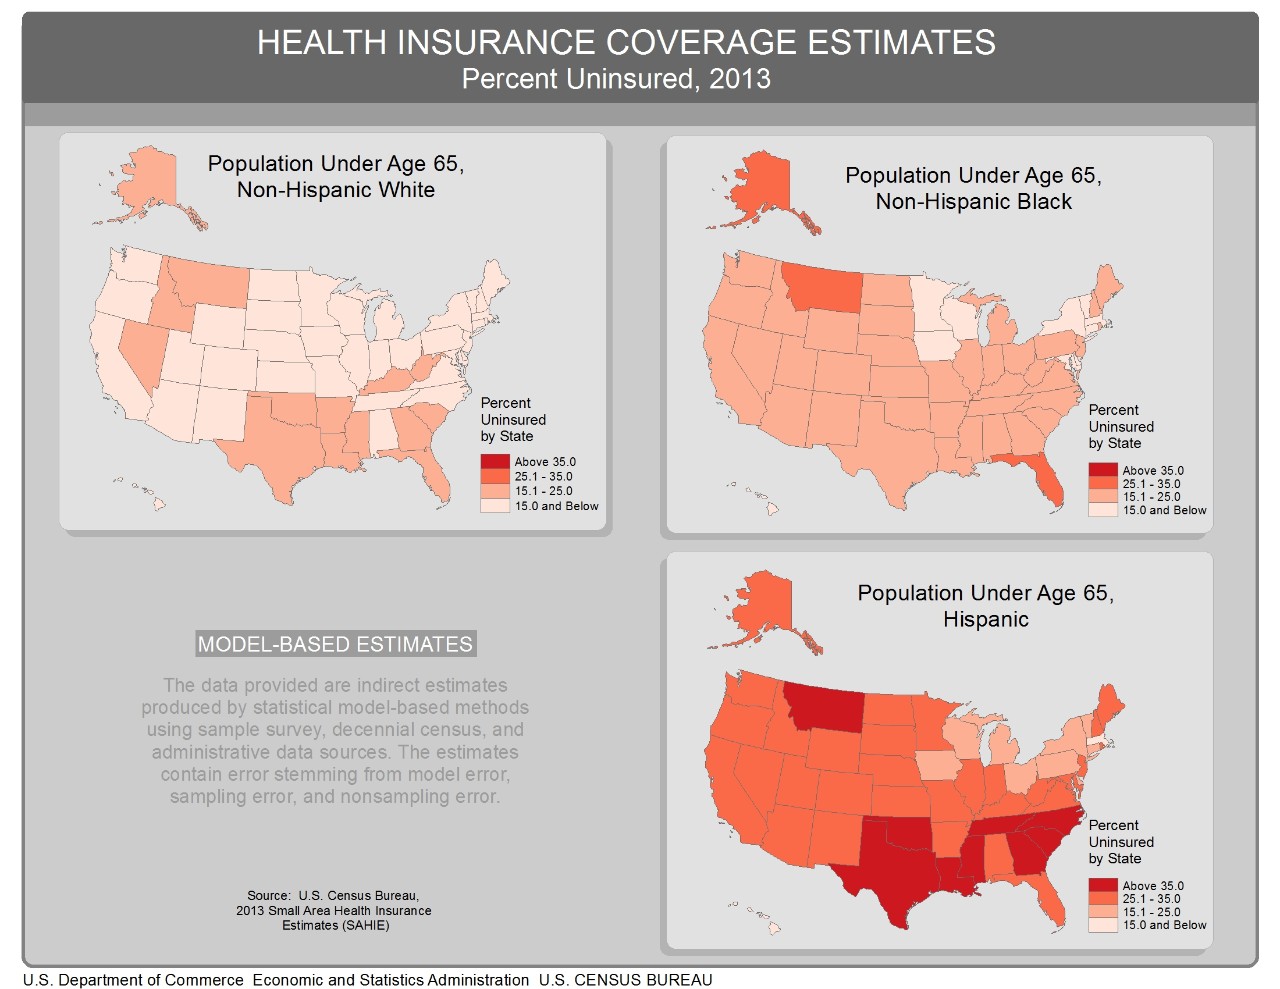 Figure 3. Percent Uninsured by Race and Ethnicity, Under Age 65, by State, 2013